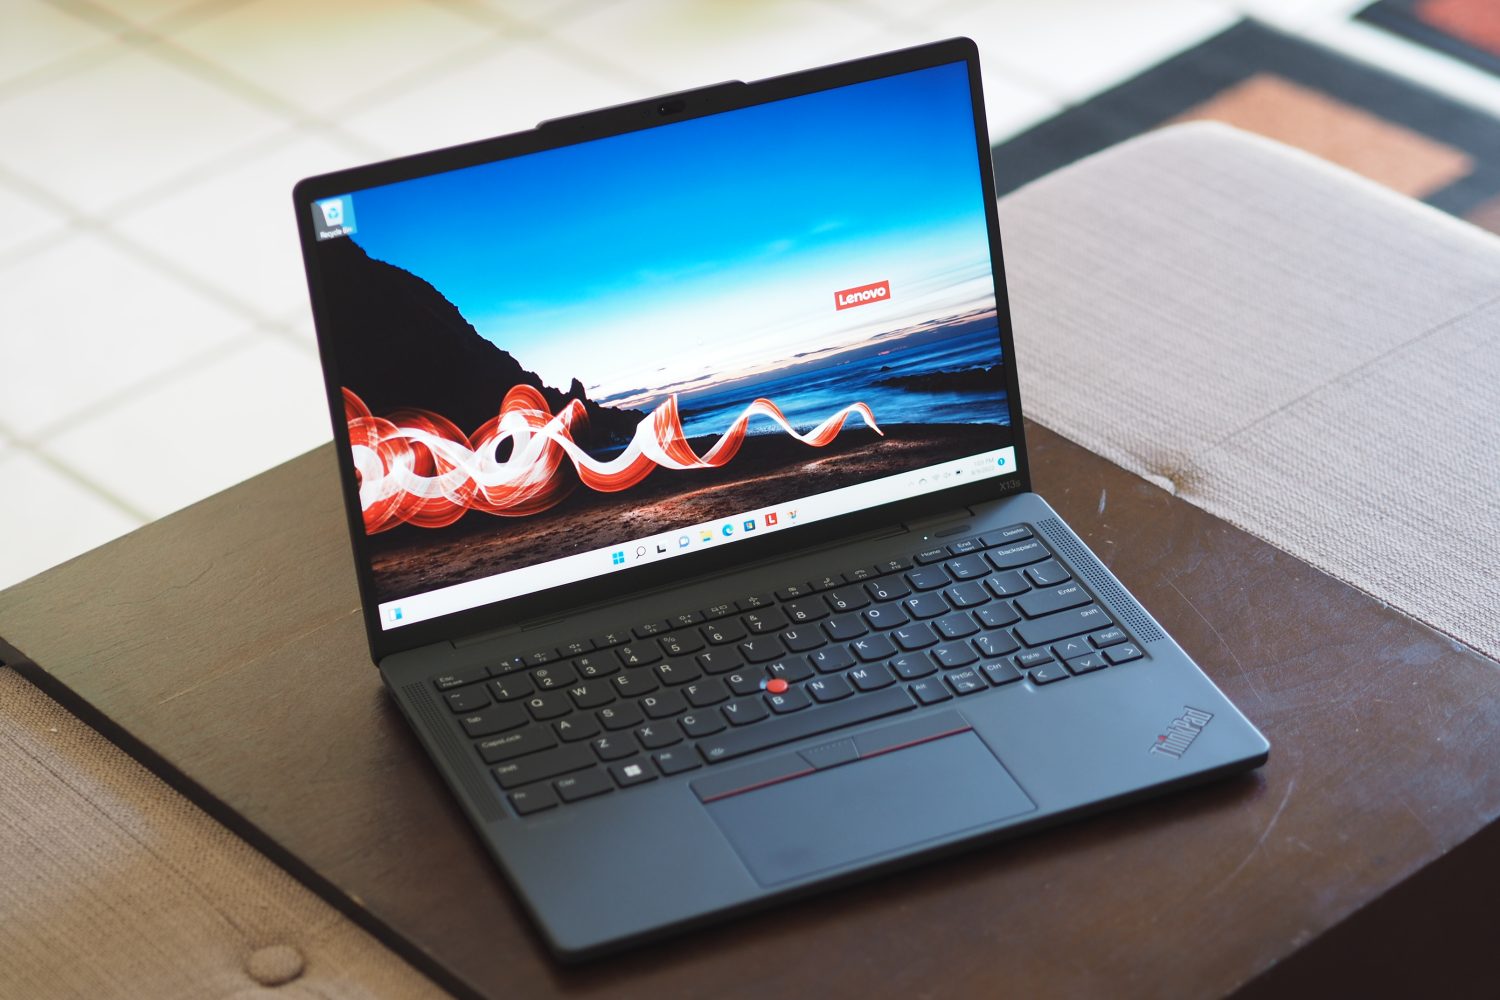 Lenovo ThinkPad X13s Gen 1 Laptop review: Snapdragon gets to work